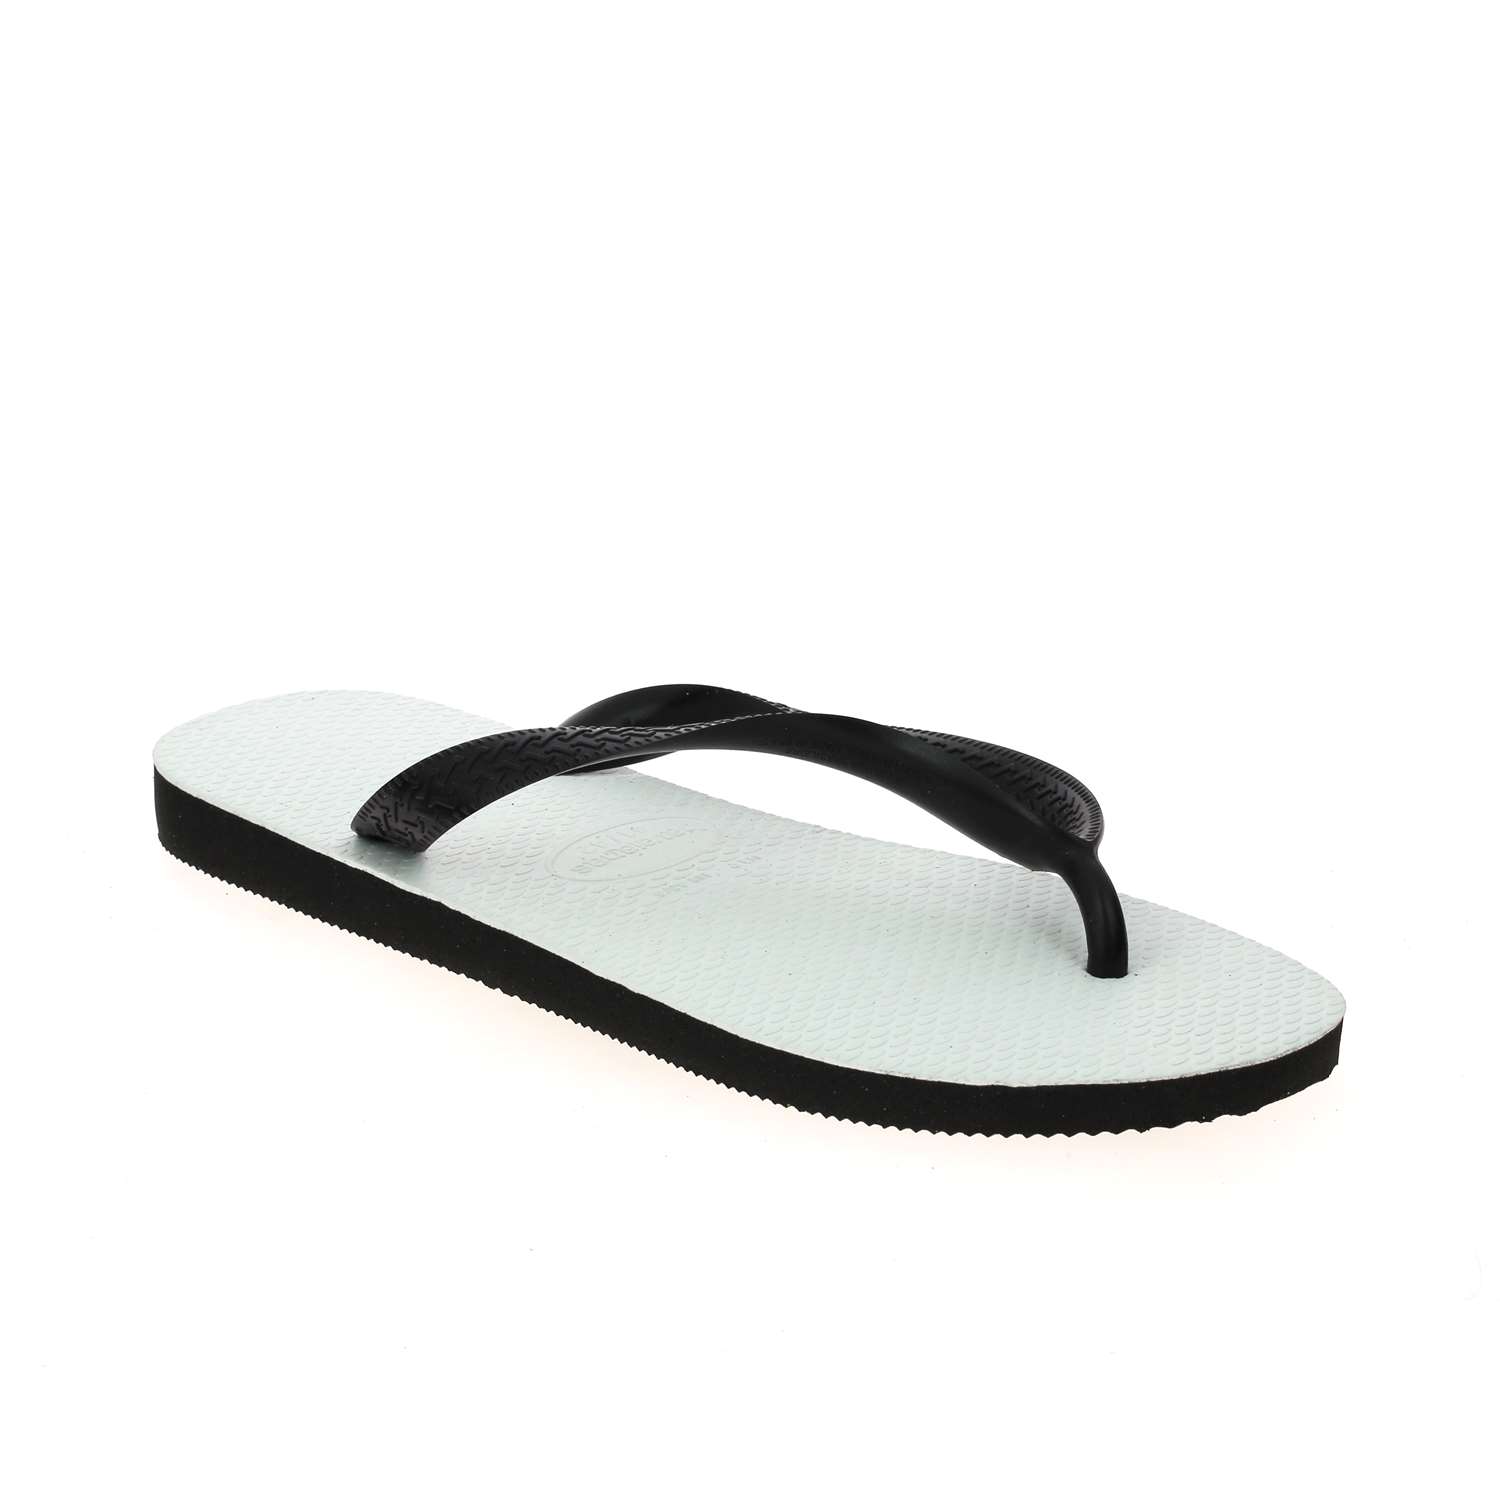 01 - TRADITIONAL - HAVAIANAS - Tongs et crocs - Synthétique